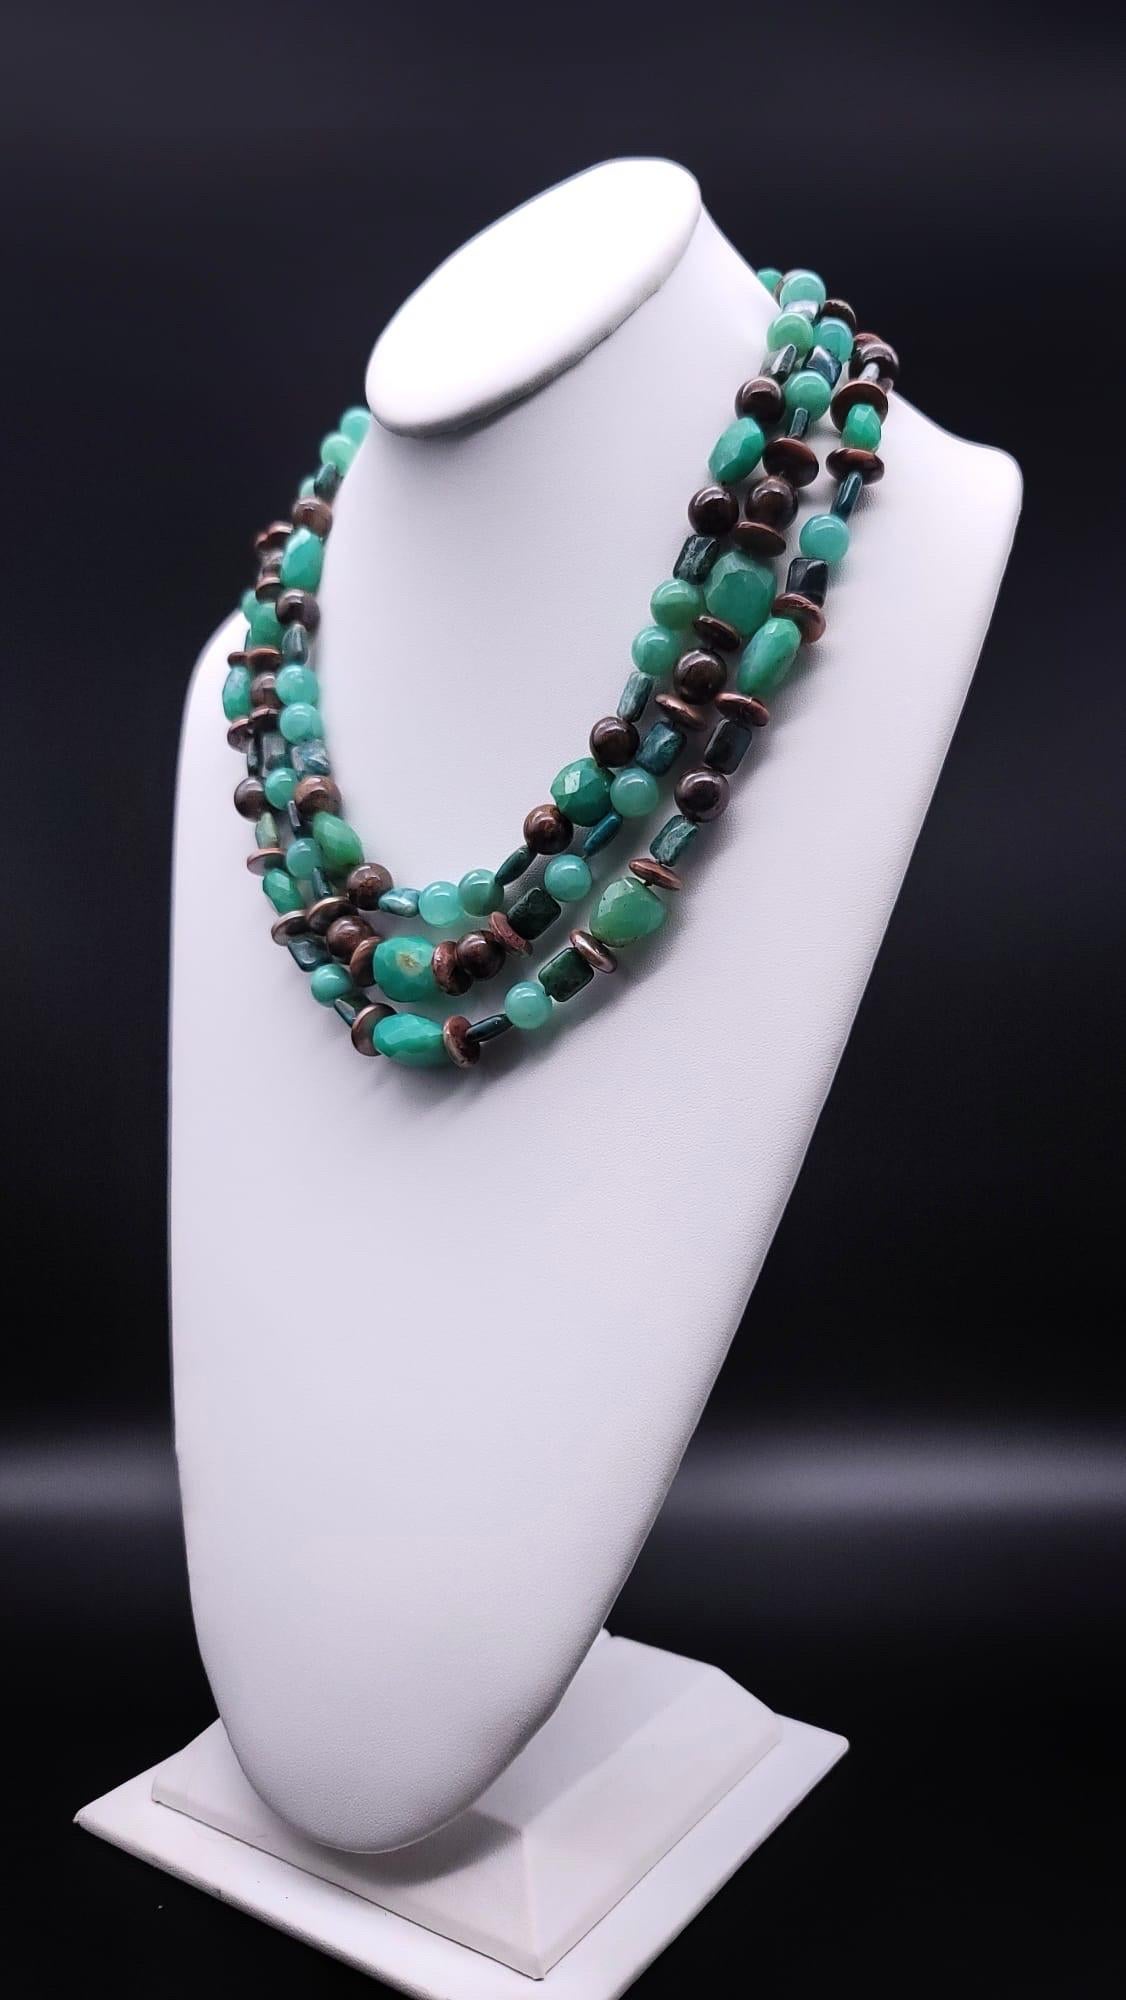 Introducing a truly unparalleled masterpiece: a symphony of colors and textures that dance together in perfect harmony. Behold a one-of-a-kind necklace adorned with a captivating blend of Chrysoprase stones, each meticulously cut and polished to